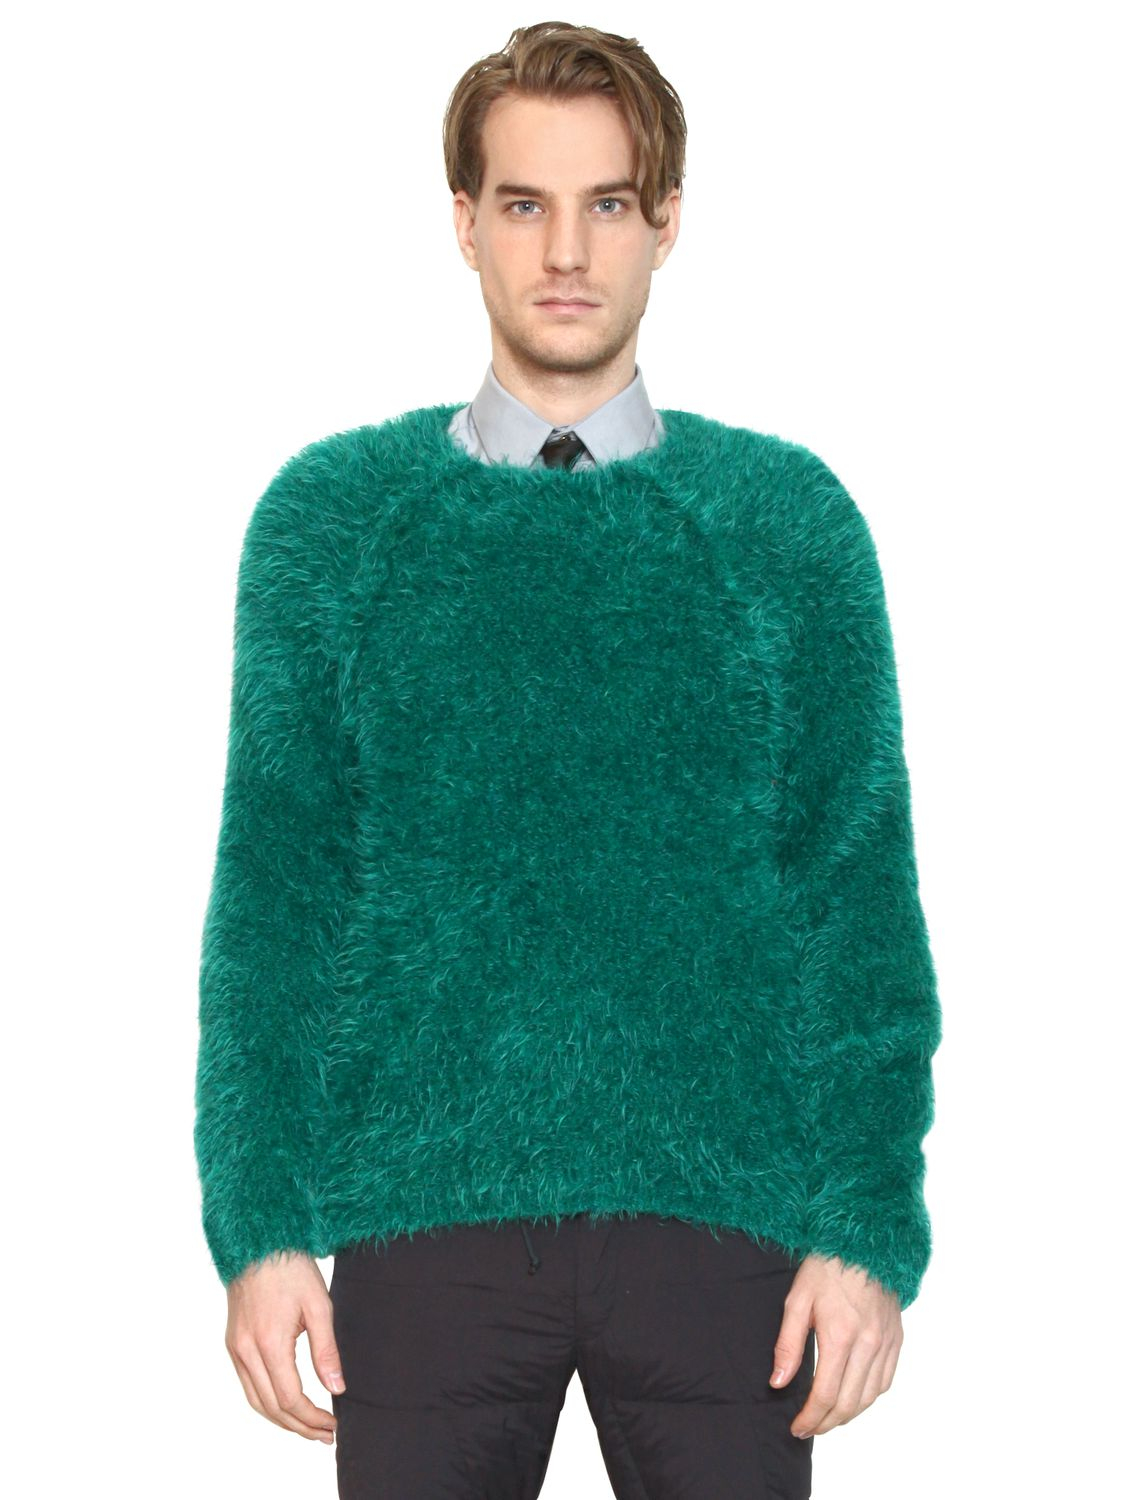 Paul Smith Mohair Blend Furry Sweater in Green for Men - Lyst